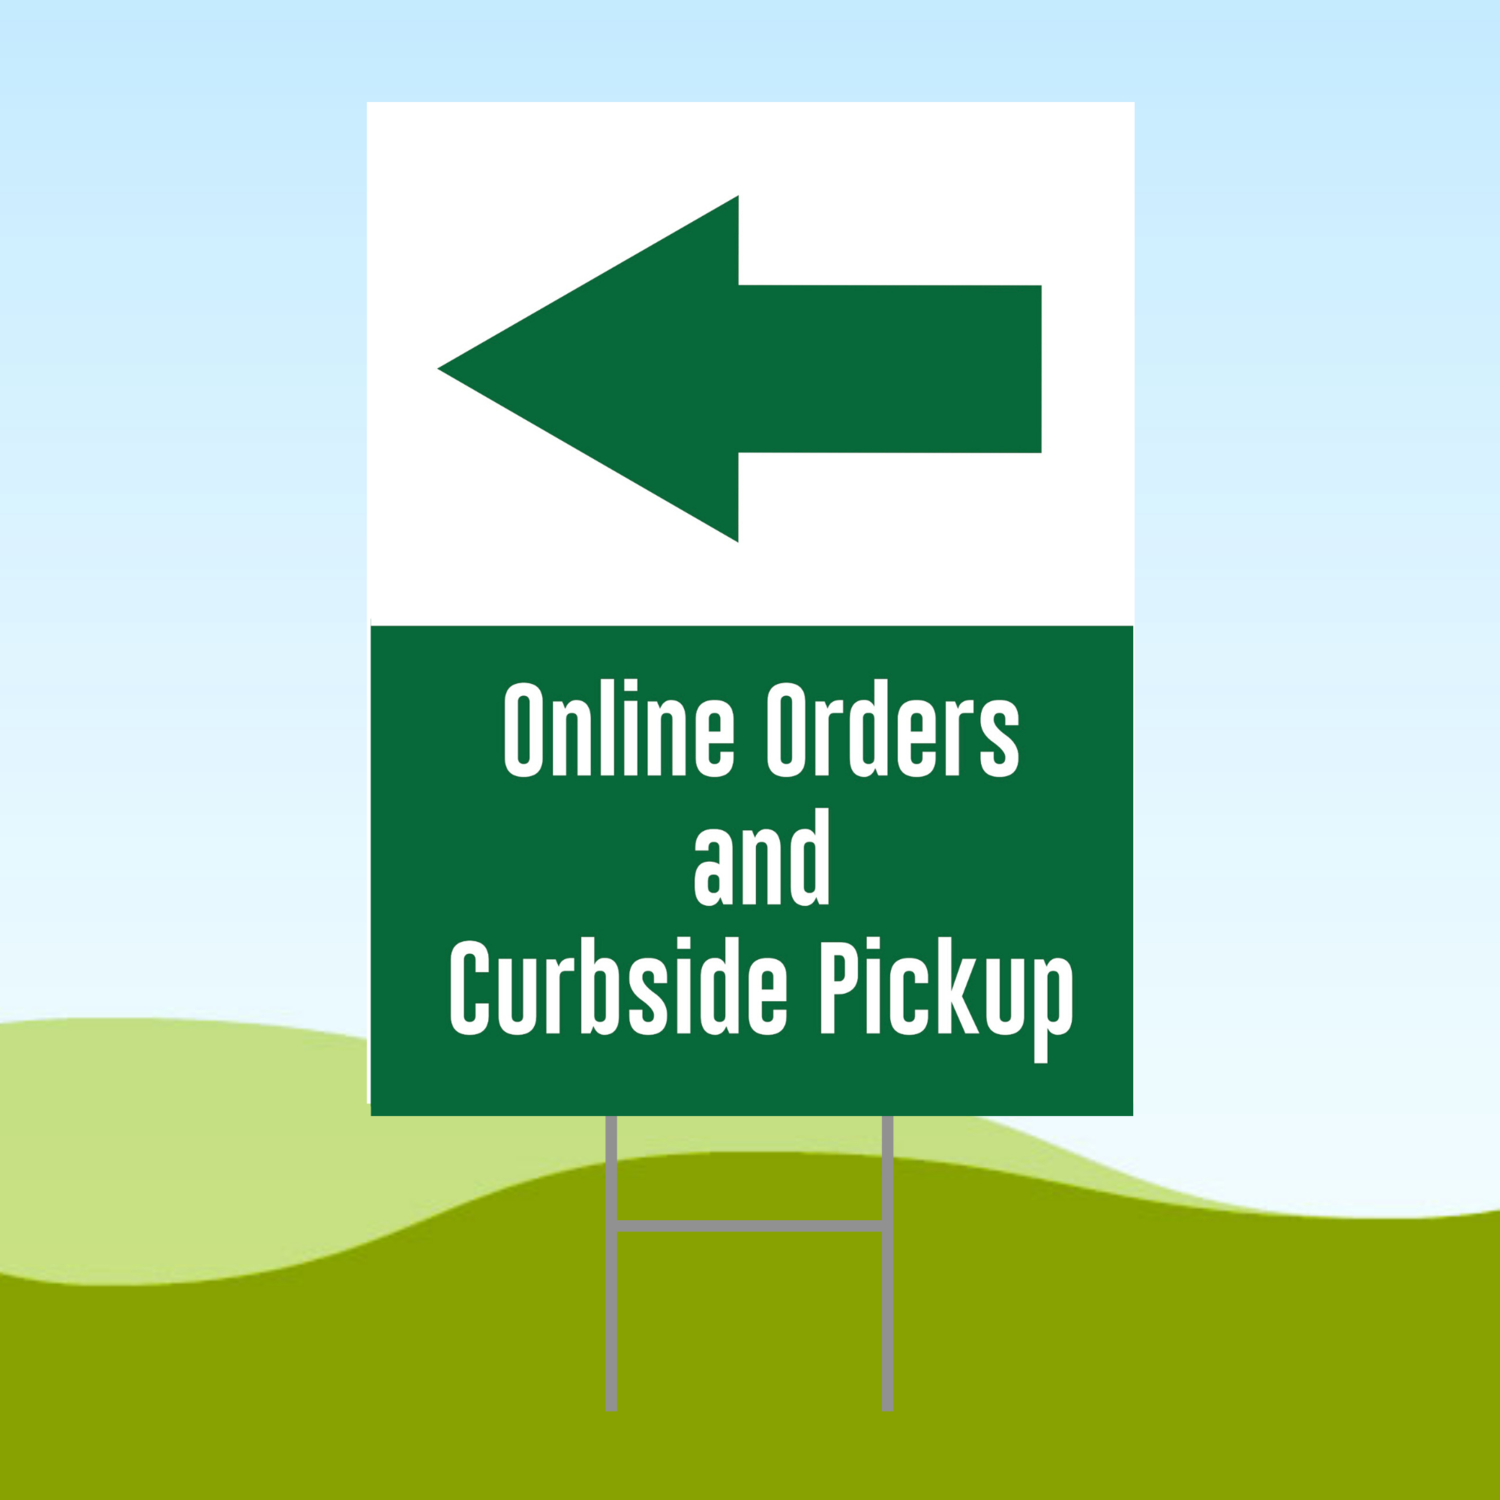 Online Orders and Curbside Pickup LEFT 18x24 Yard Sign WITH STAKE Corrugated Plastic Bandit